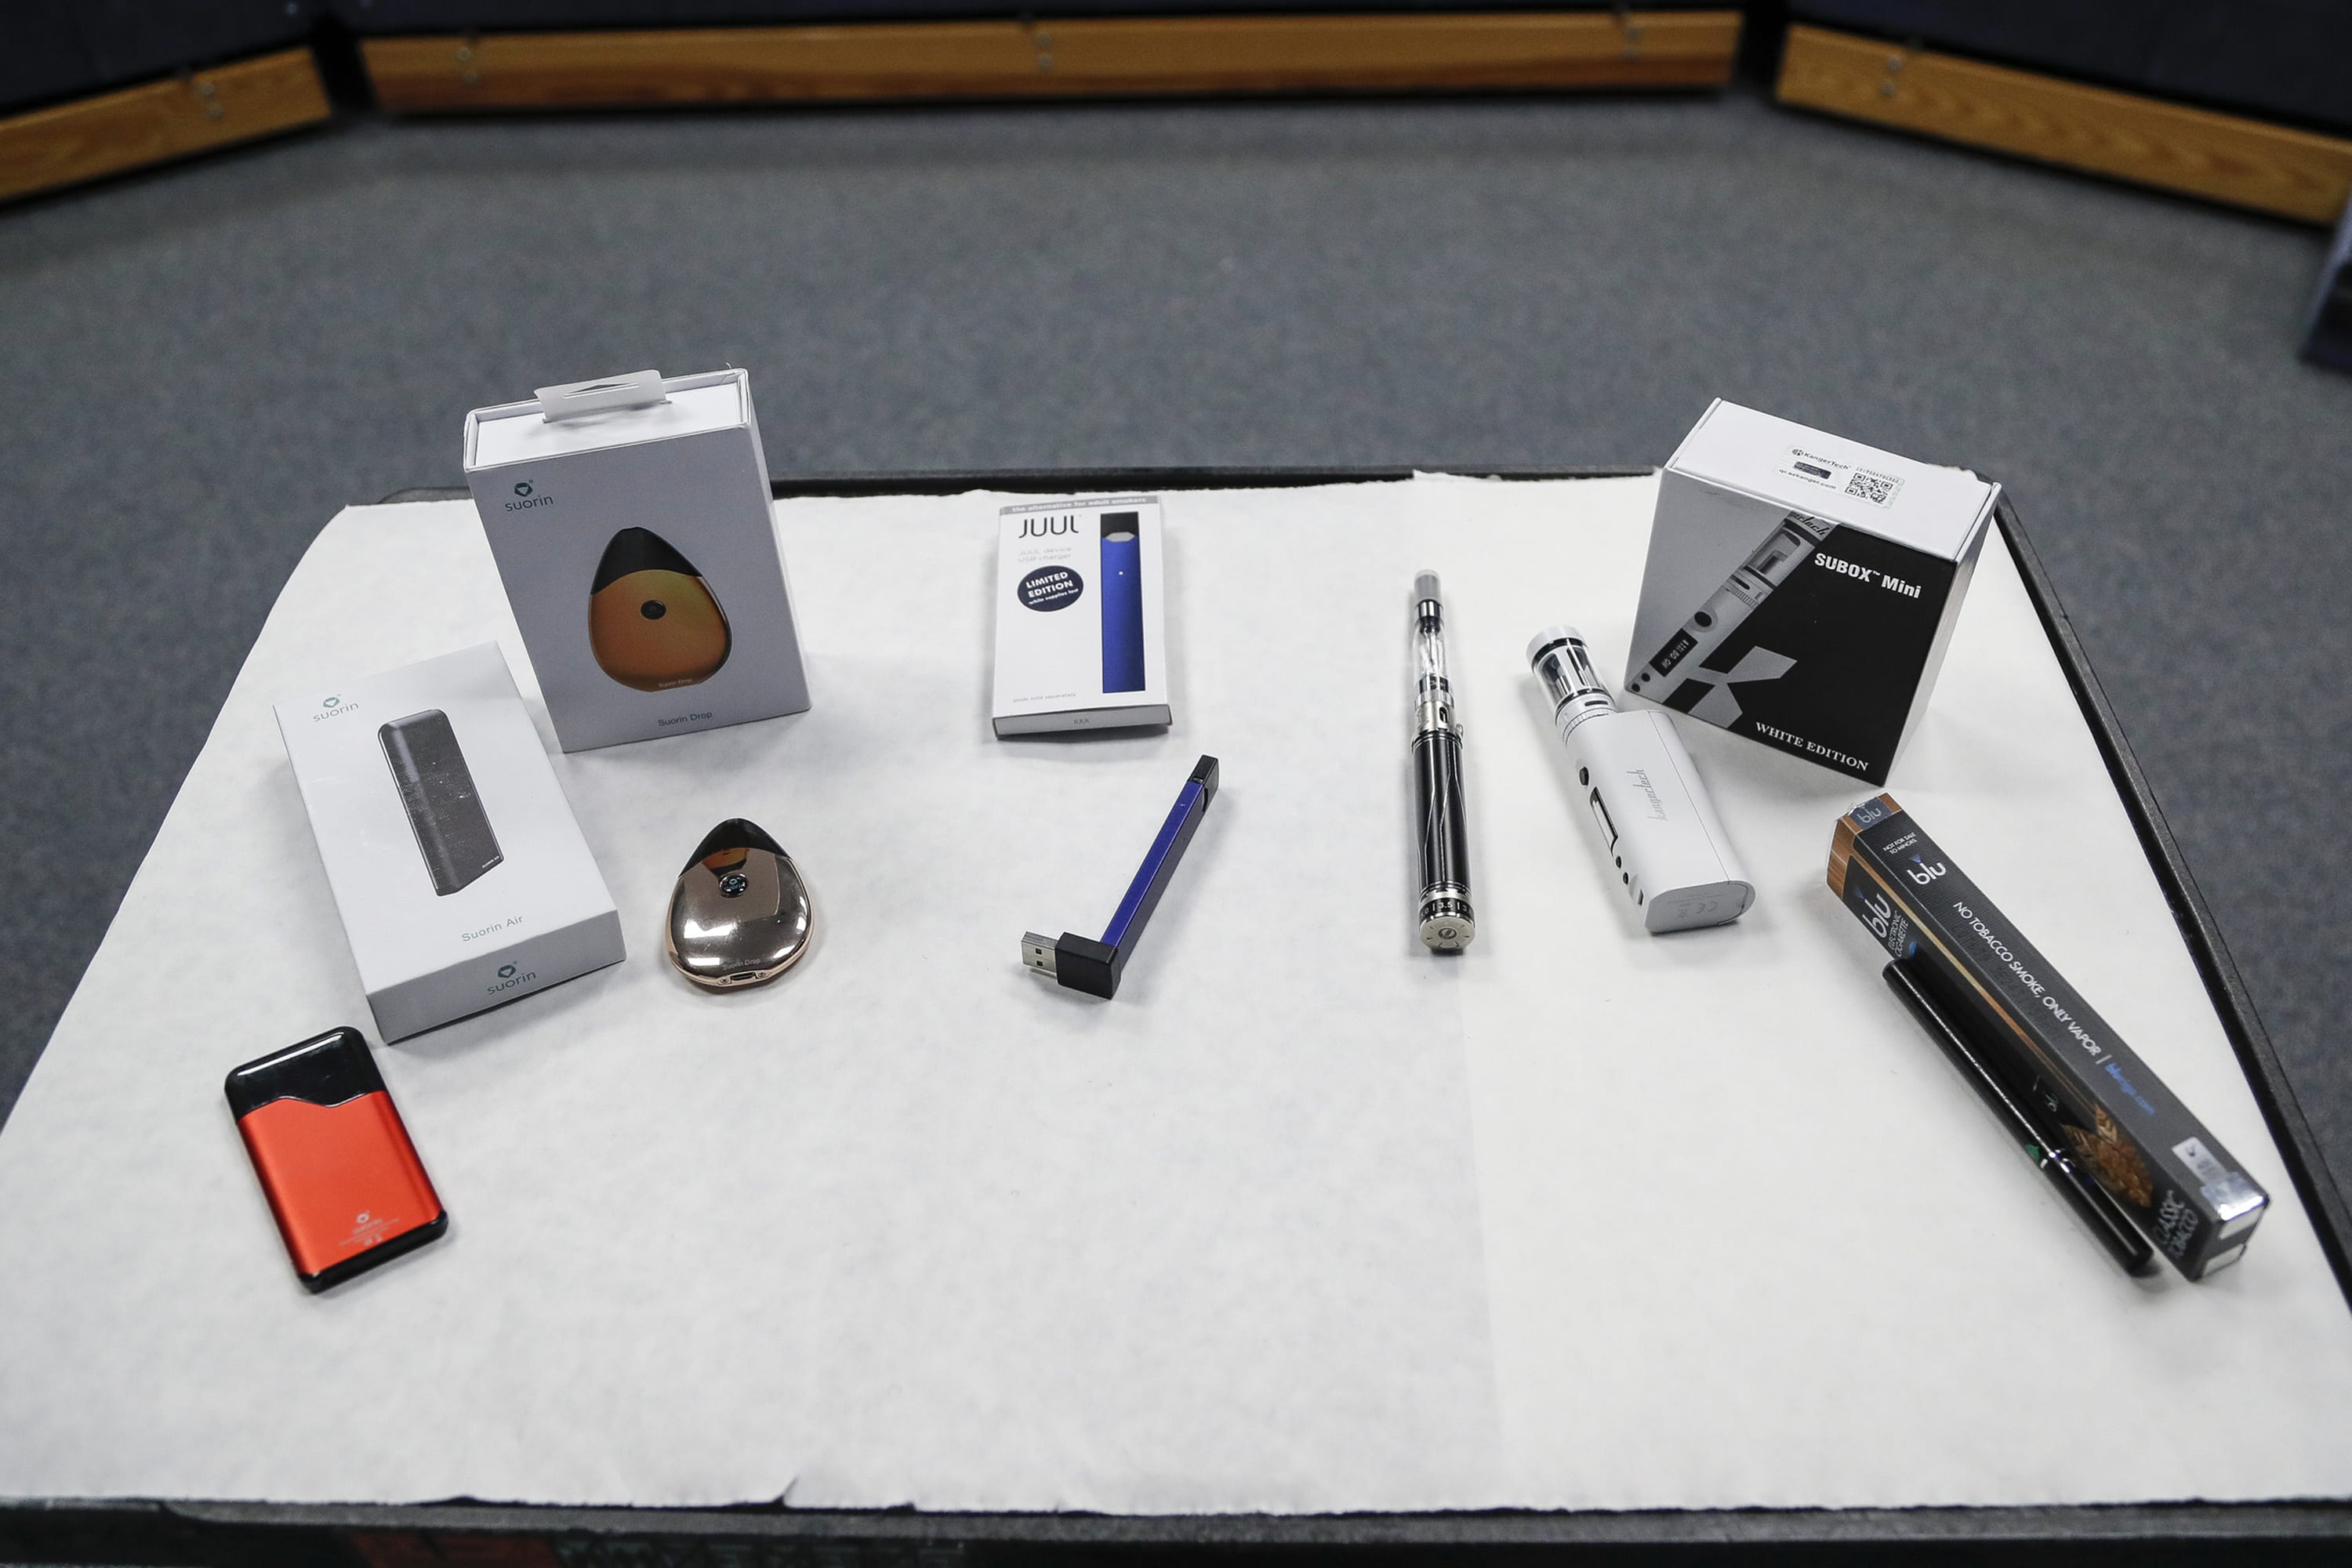 Lawmakers urge FDA to pull Juul, other e-cigarettes from the market